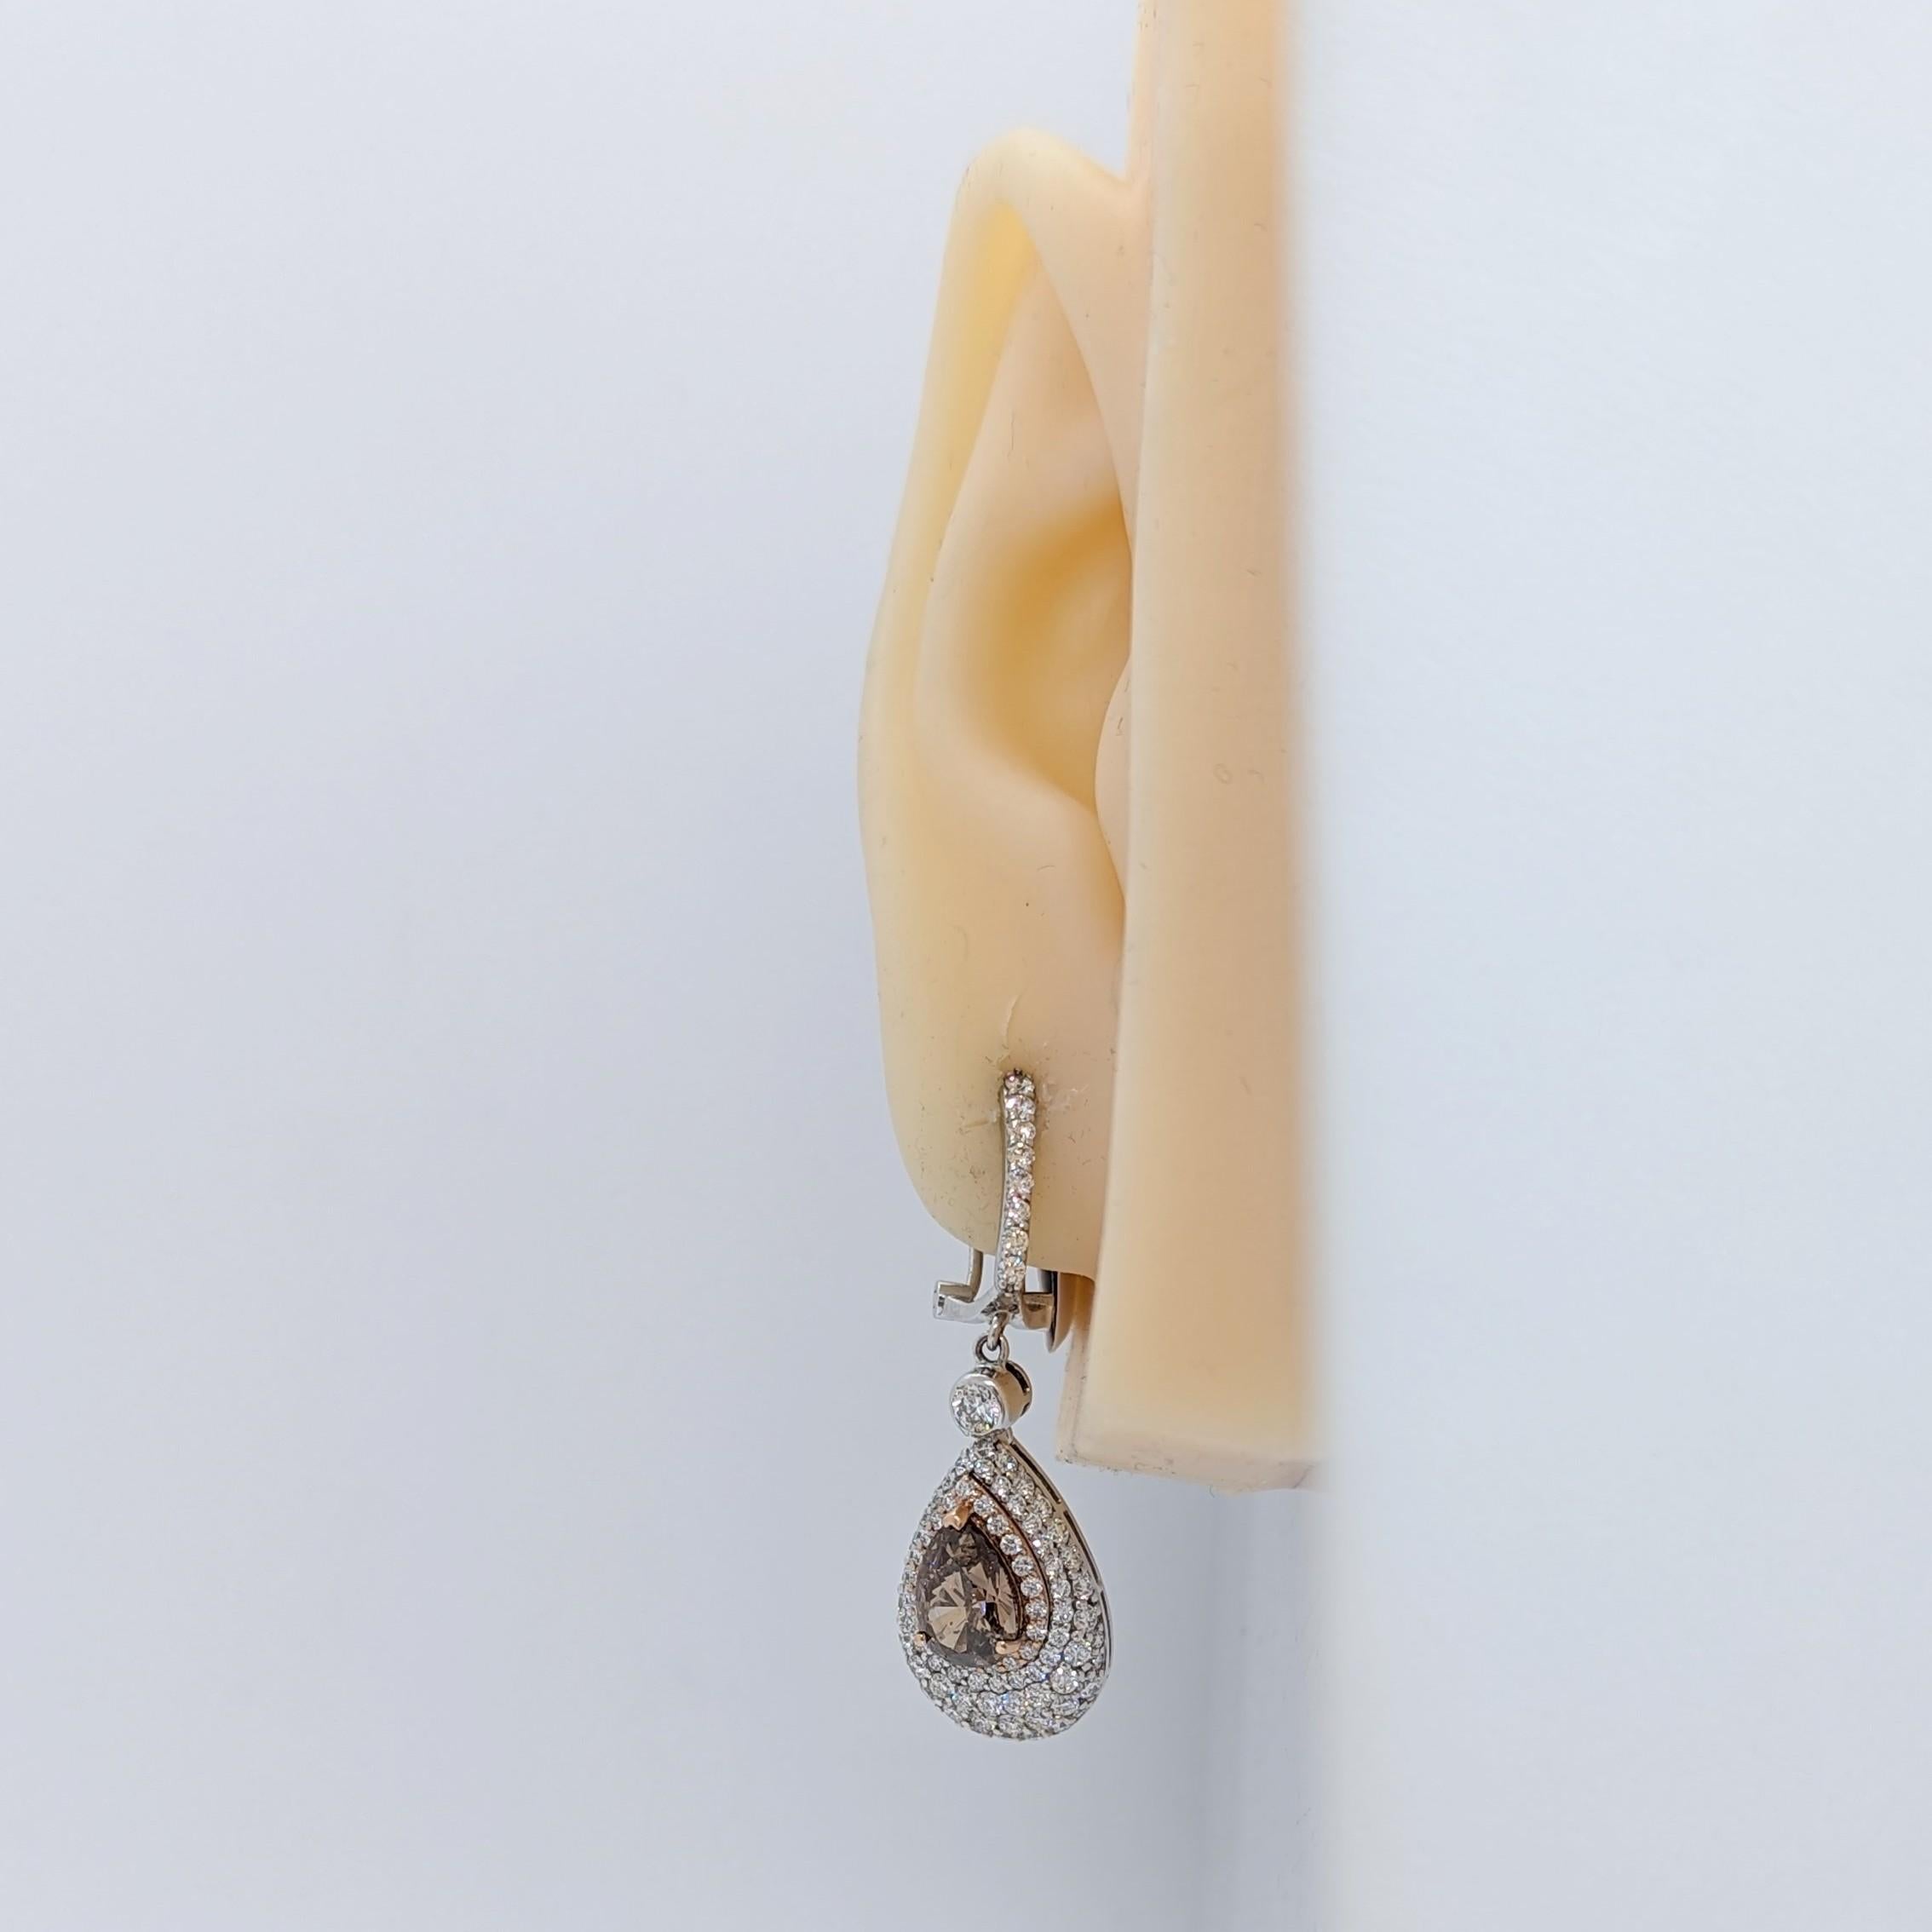 Beautiful dangle earrings with 5.99 ct. brown and white diamond pear shapes and rounds.  Handmade in 14k white and rose gold.